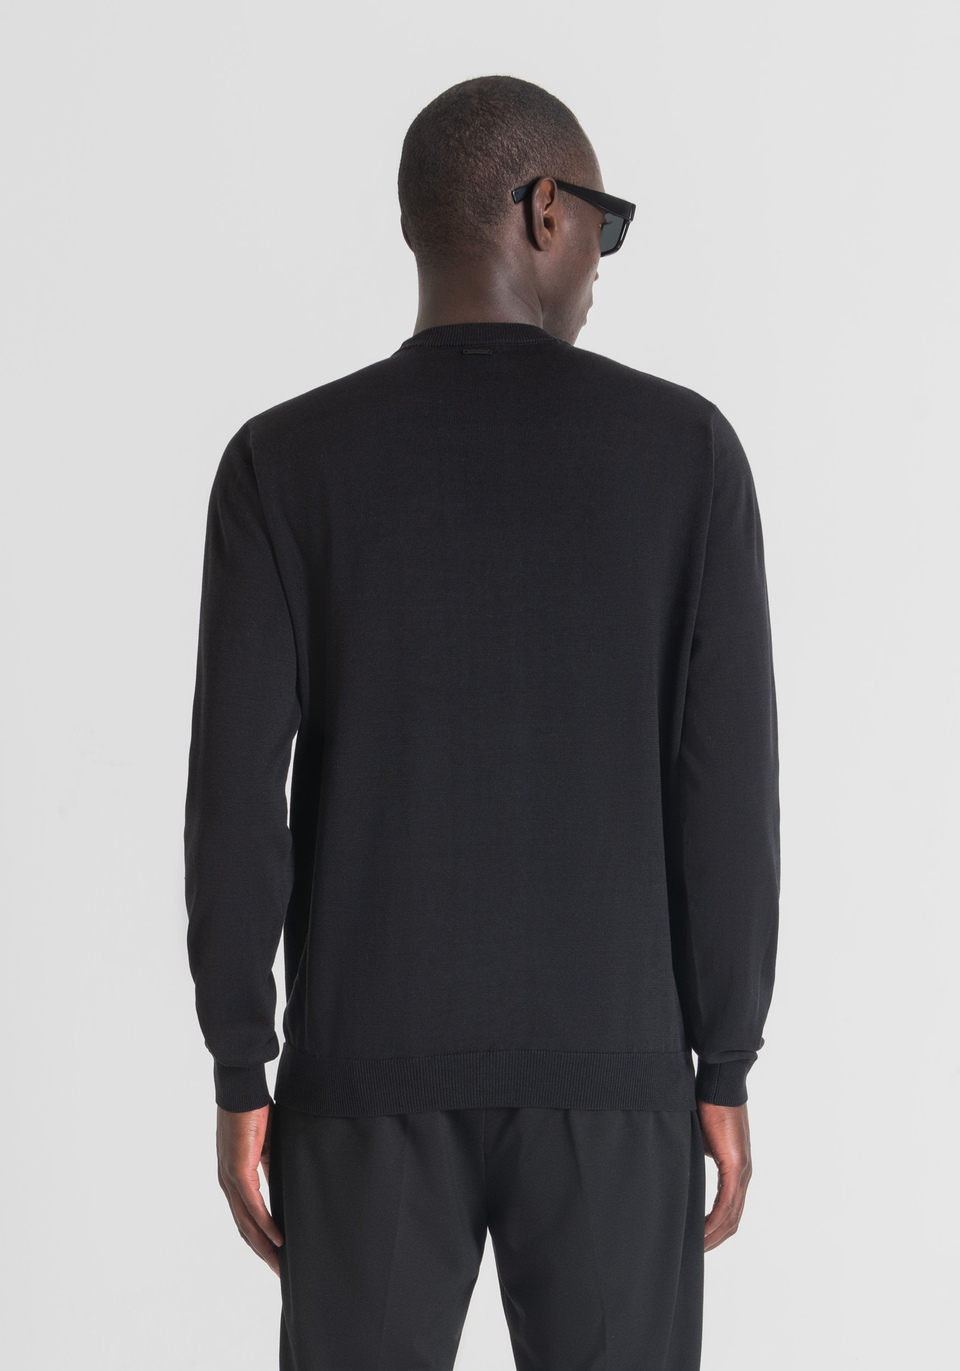 REGULAR-FIT SWEATER IN SOFT MERCERISED COTTON WITH JACQUARD PATTERN - Antony Morato Online Shop